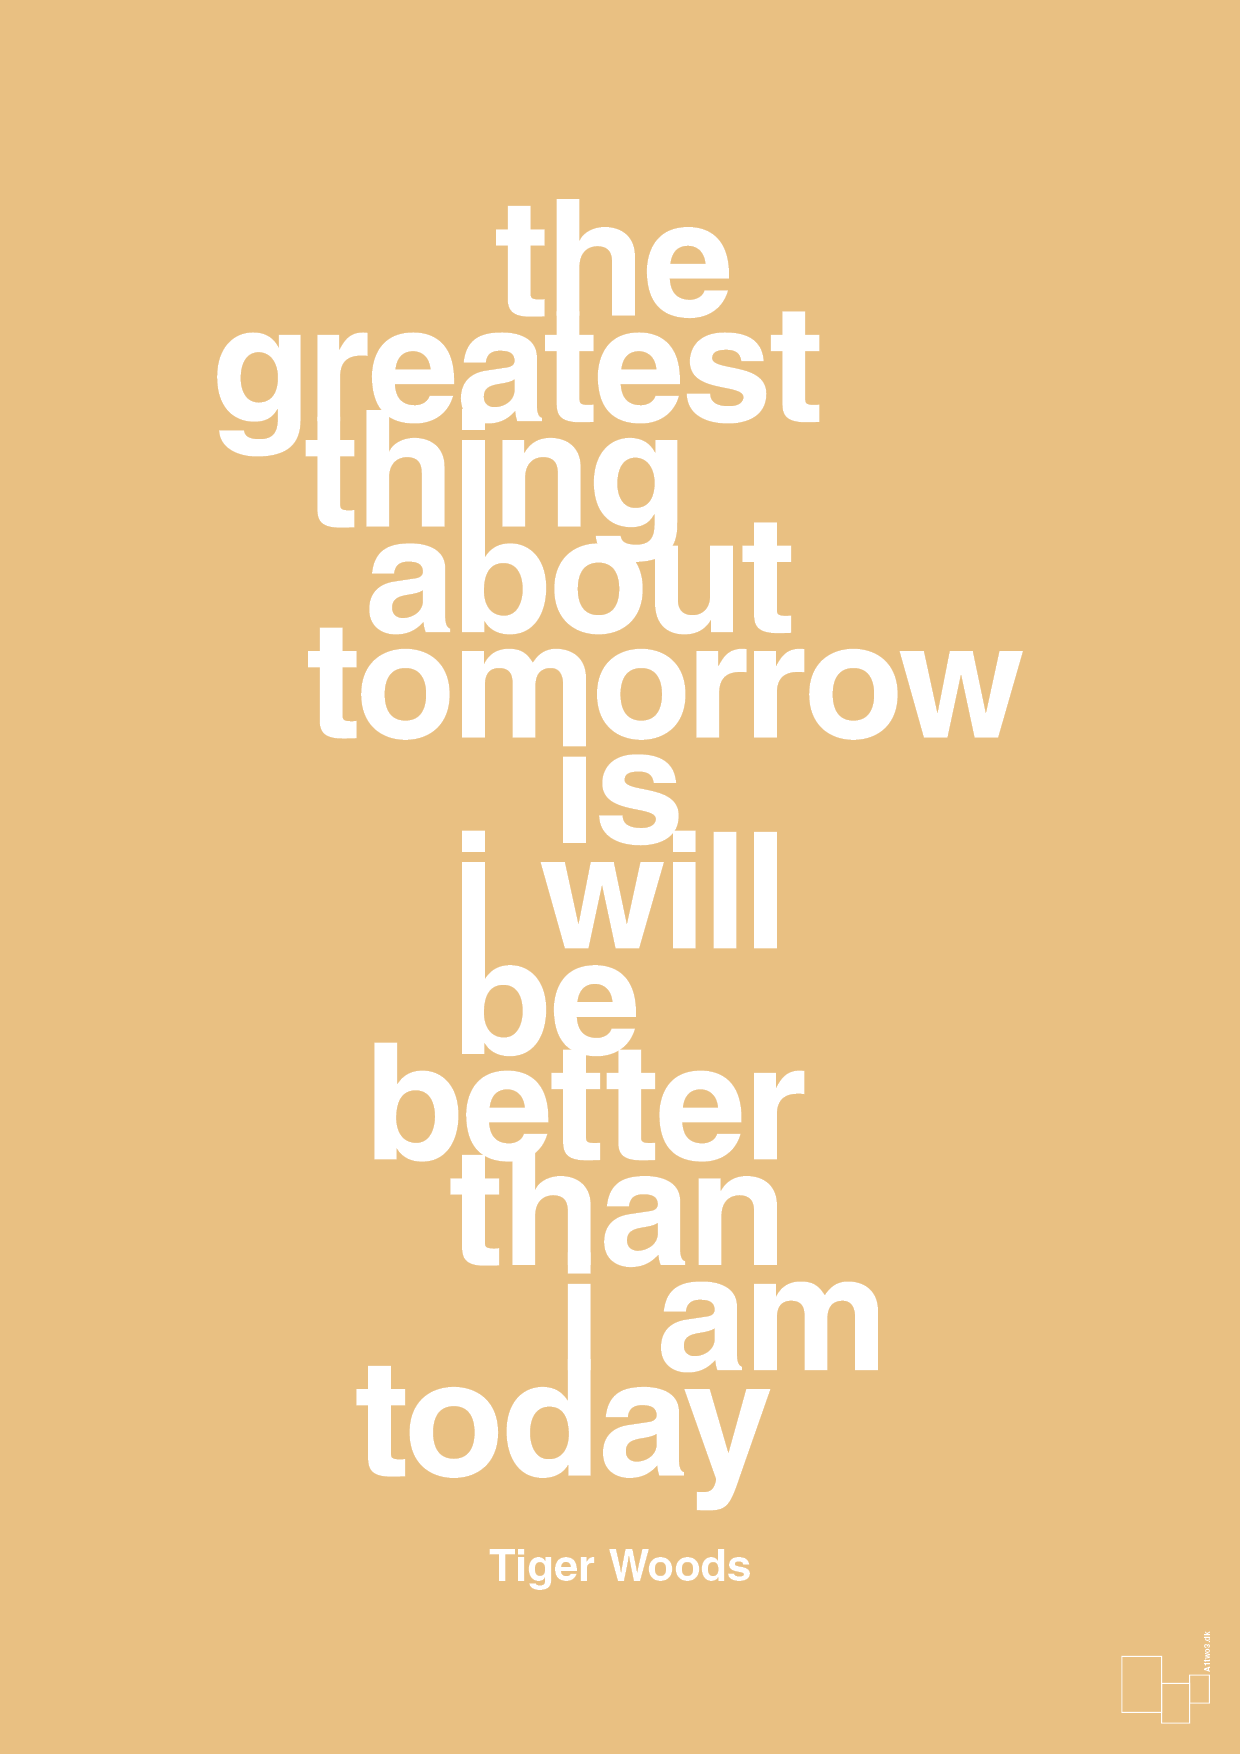 the greatest thing about tomorrow is i will be better than i am today - Plakat med Citater i Charismatic